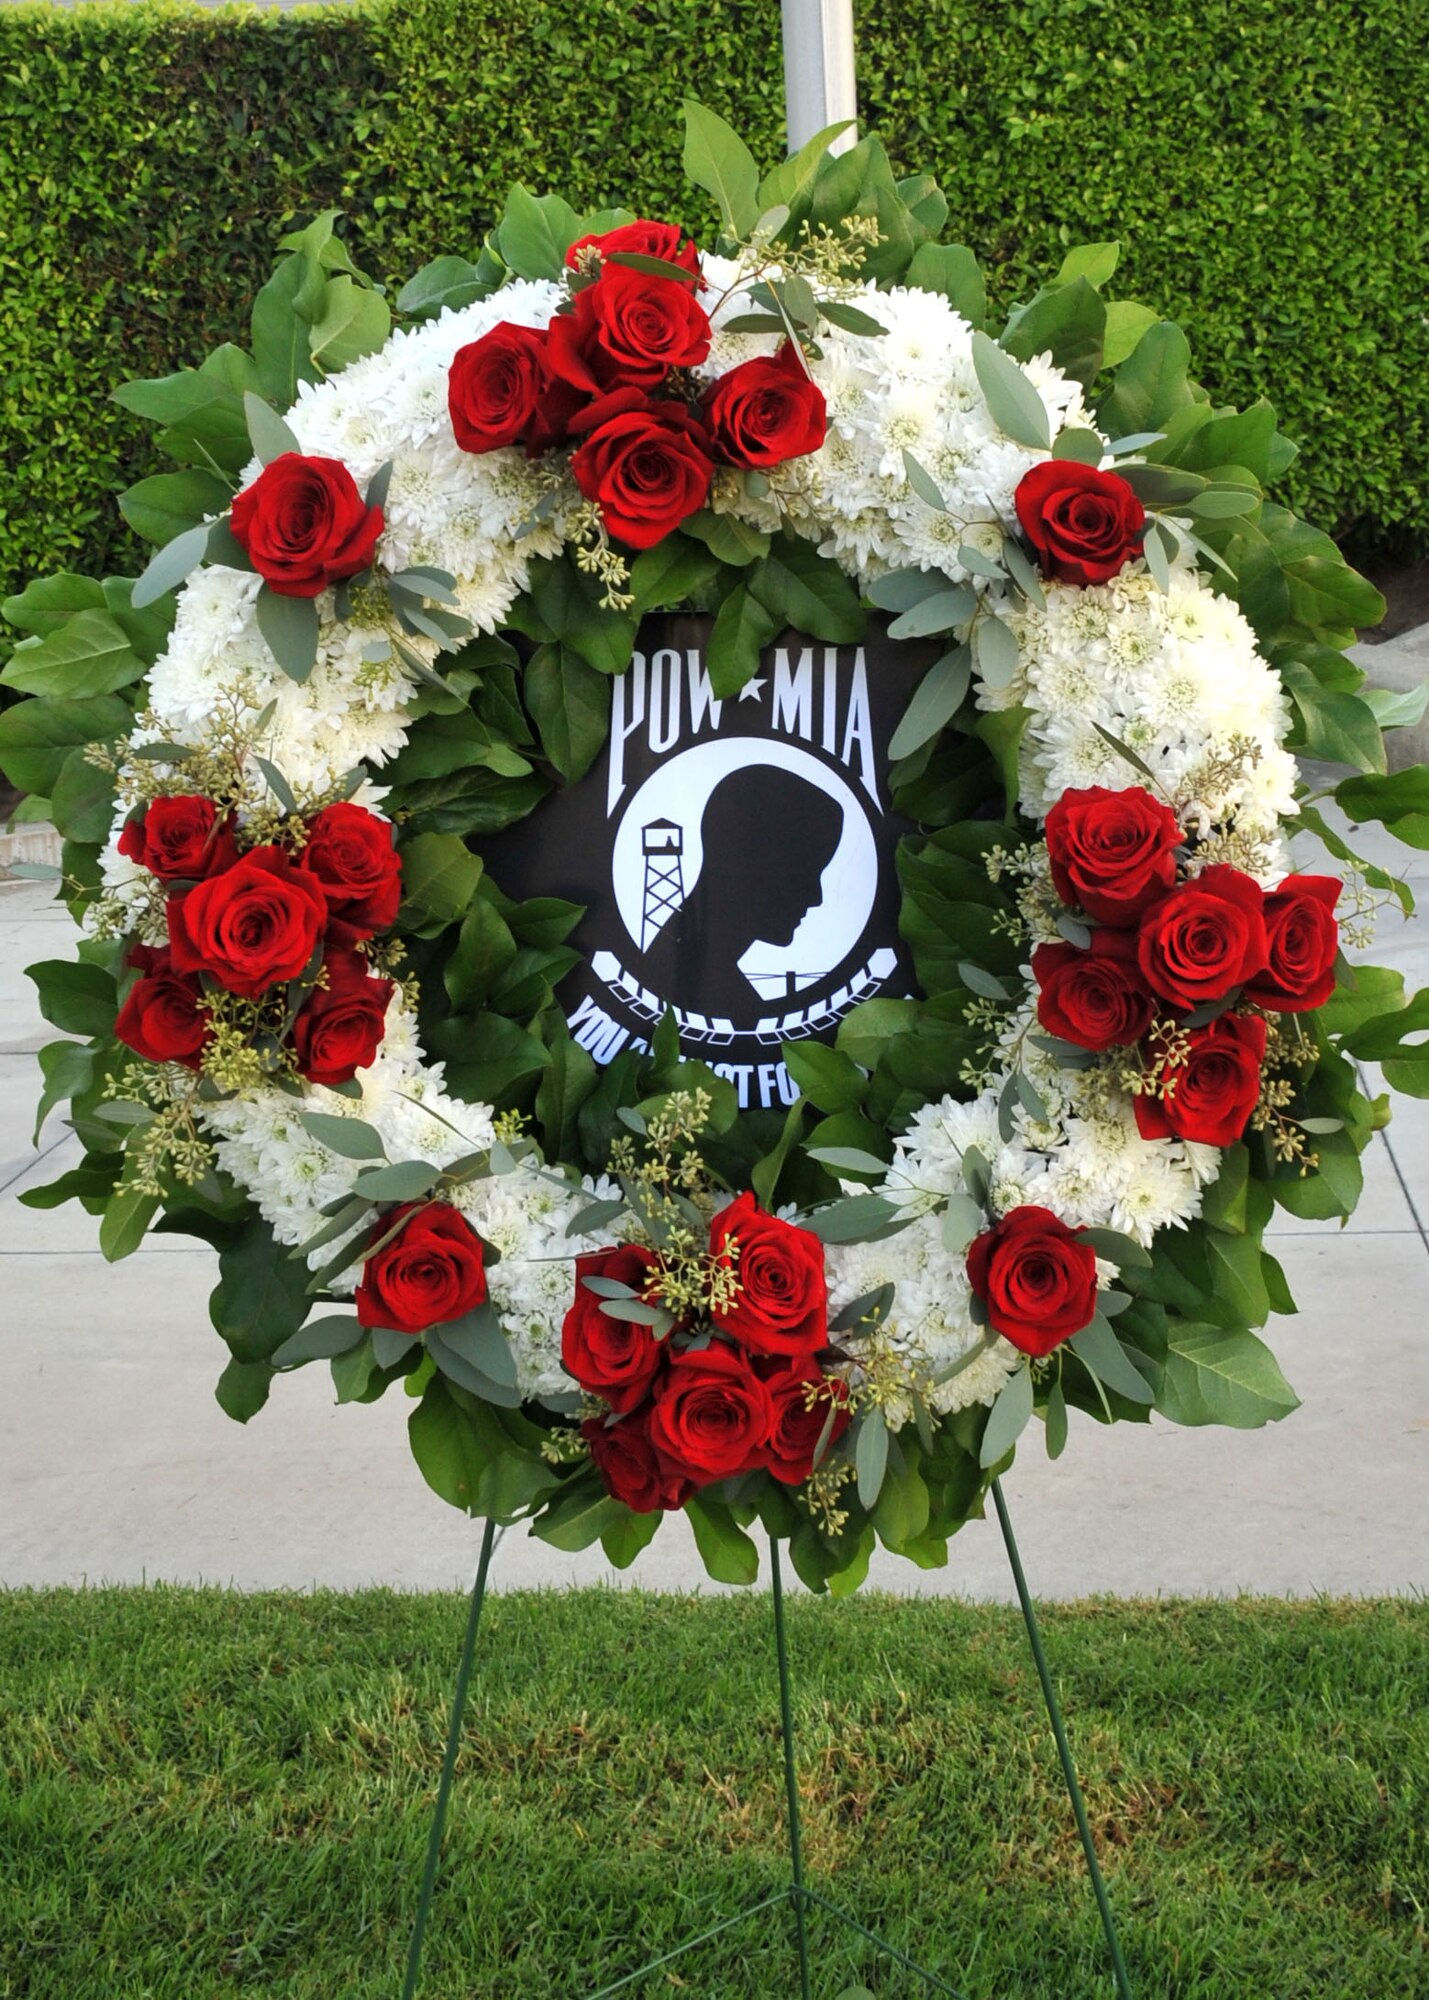 A commemorative POW/MIA wreath stands in repose awaiting the start of the National POW/MIA Recognition Day at the Space and Missile Systems Center's Schriever Space Complex flagpole at Los Angeles Air Force Base in El Segundo, Calif. (U.S. Air Force photo/Sarah Corrice)